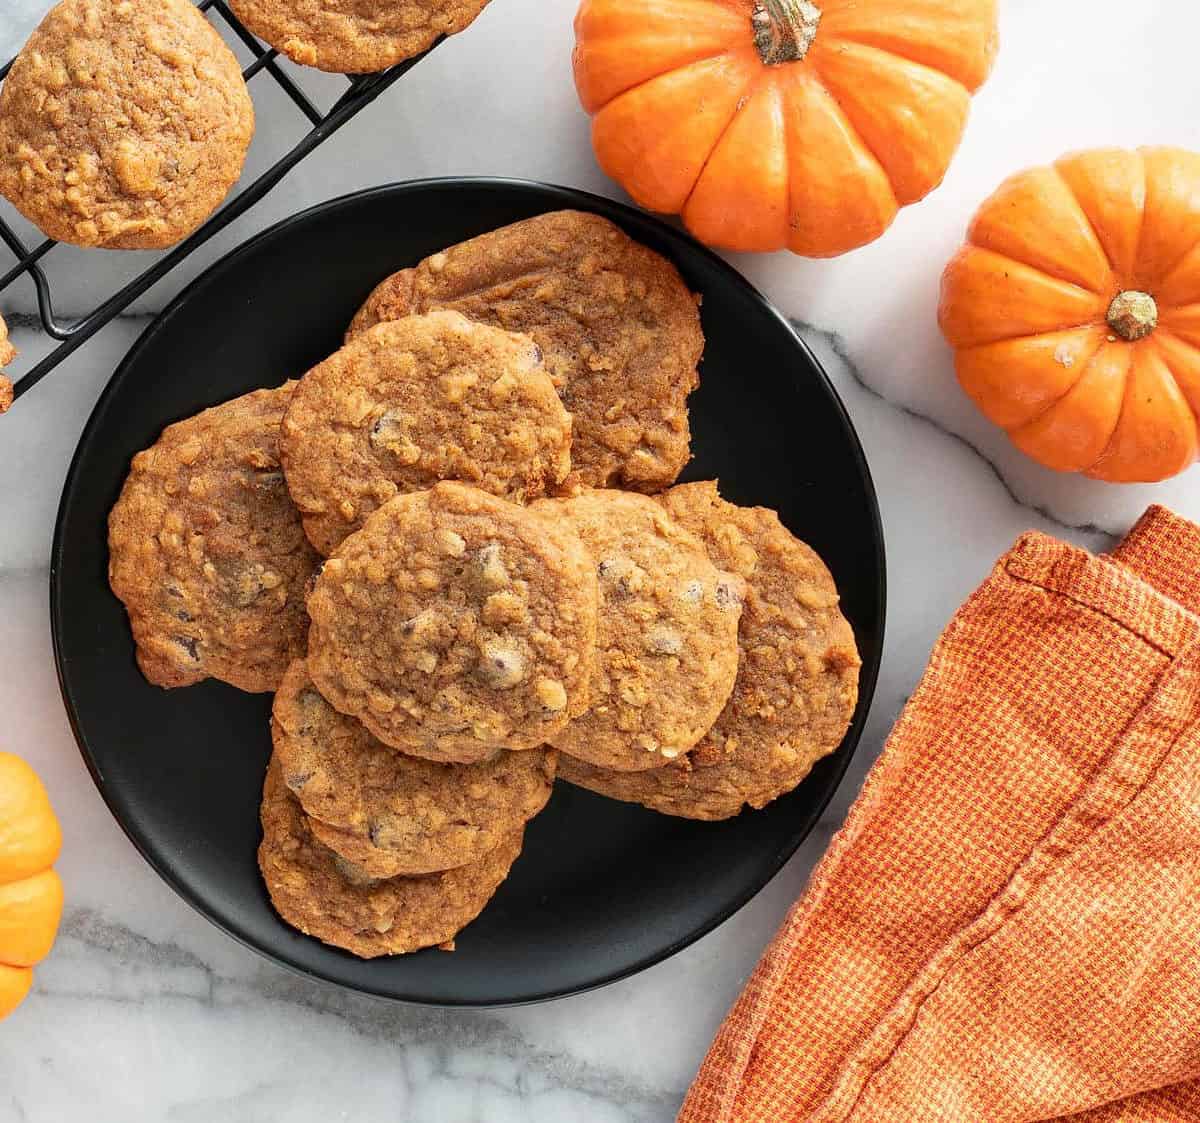  These cookies make autumn feel cozy, warm and delicious.